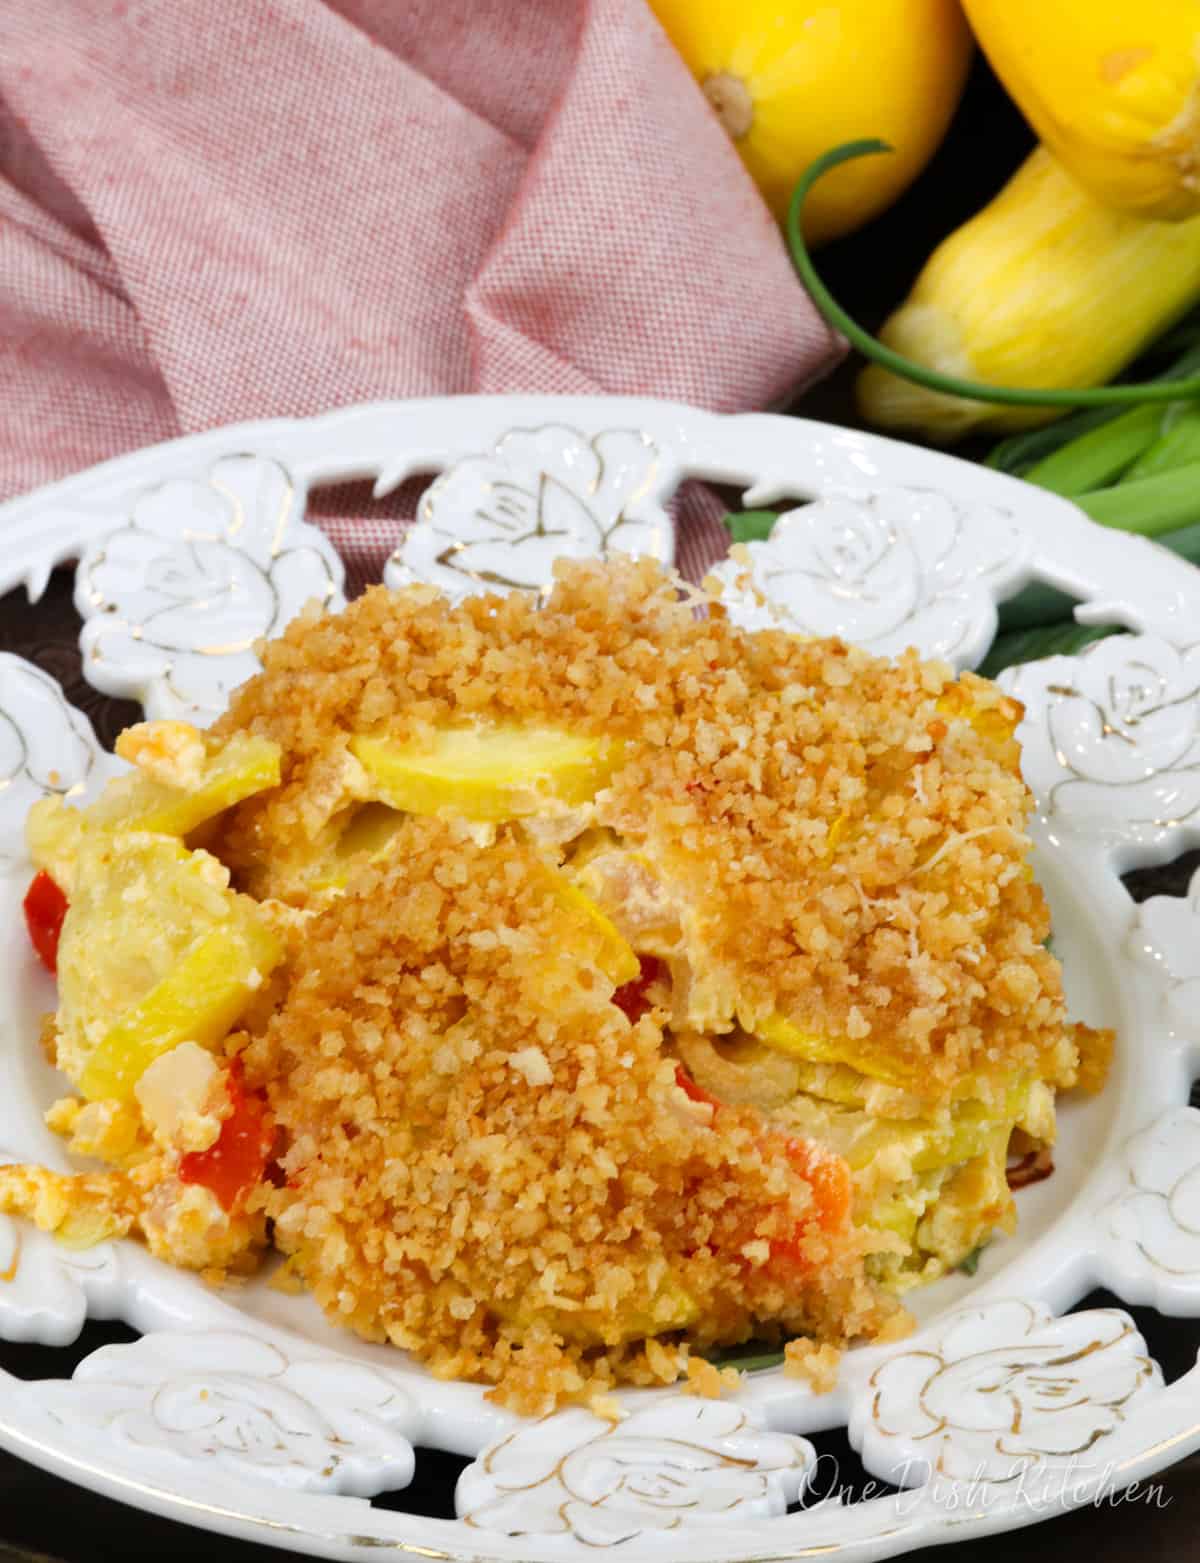 a serving of squash casserole topped with breadcrumbs on a white plate next to an orange napkin.